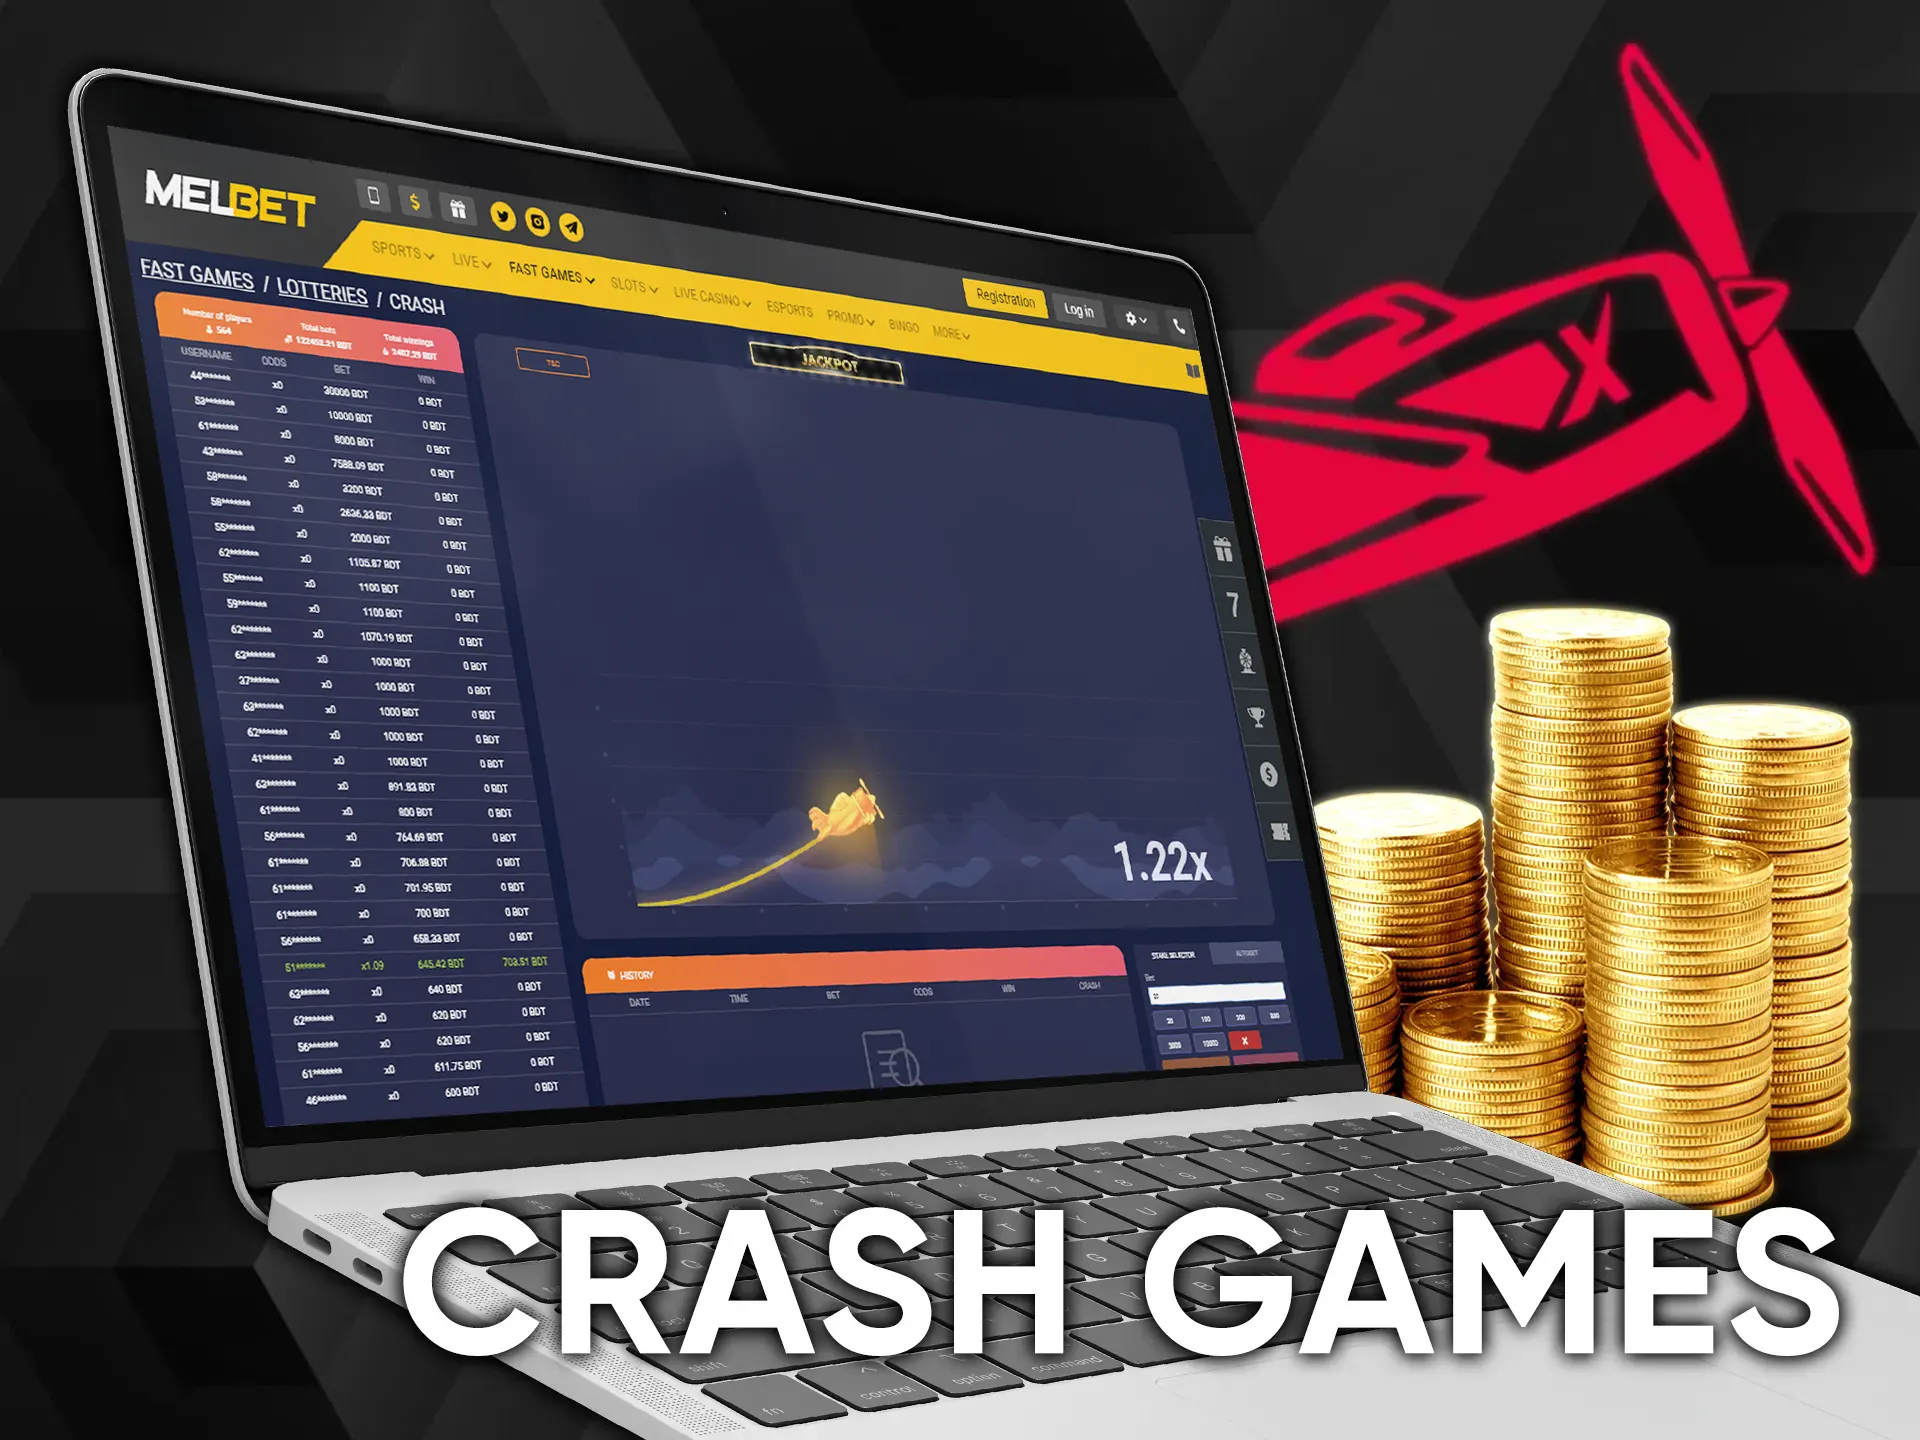 Win a lot of money by playing crash games.